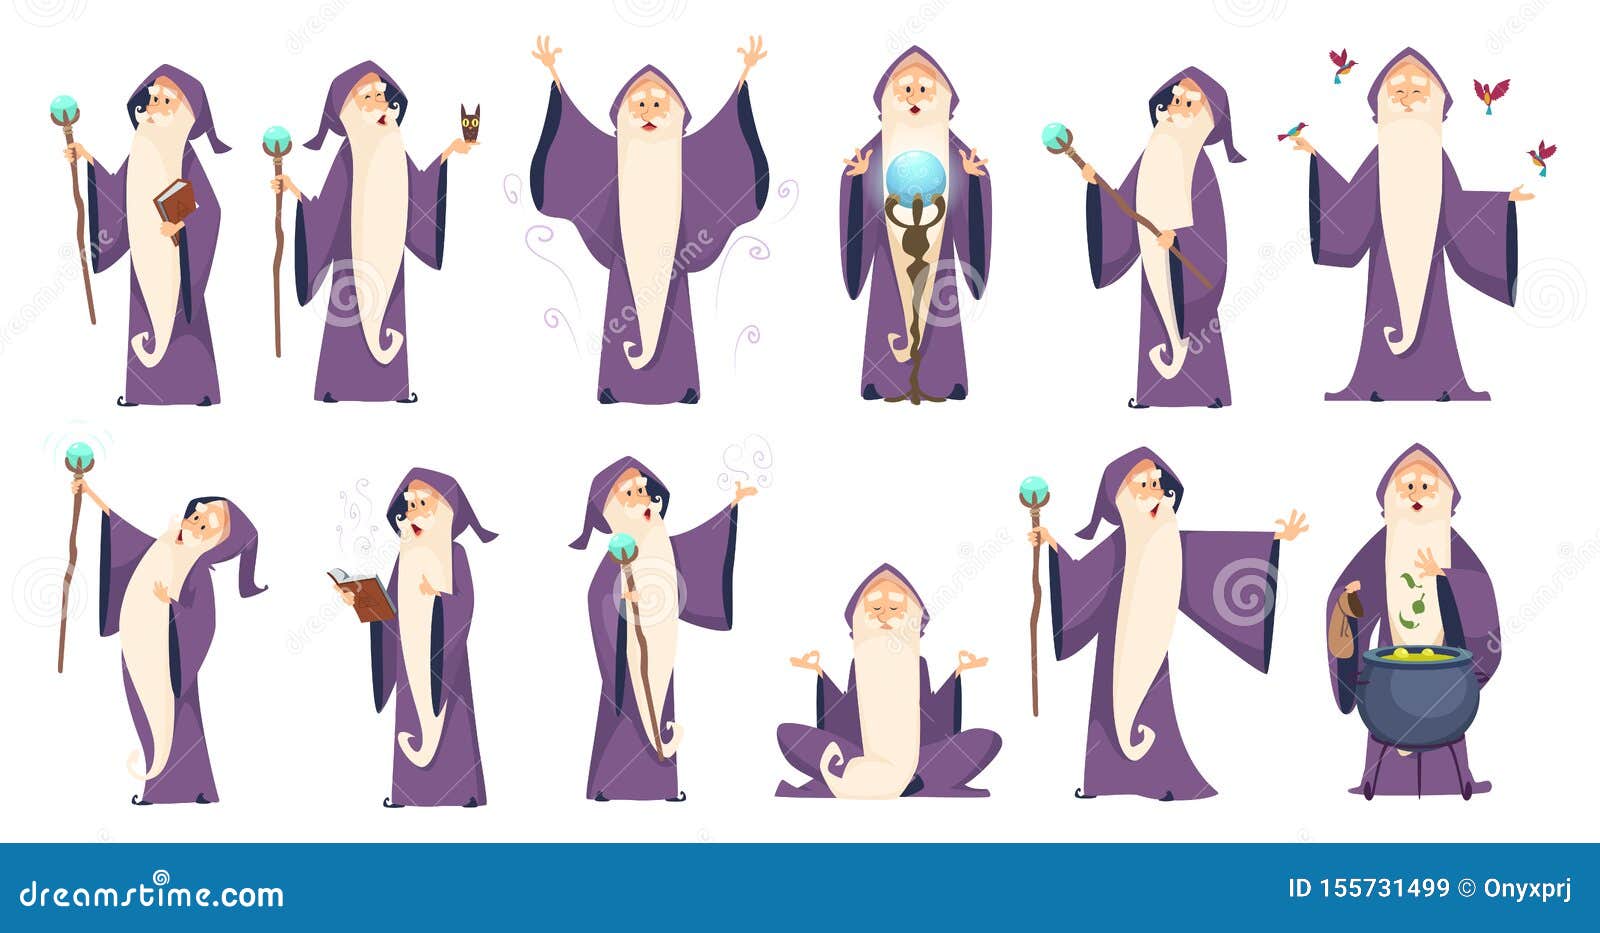 wizard. mysterious male magician in robe spelling oldster merlin  cartoon characters